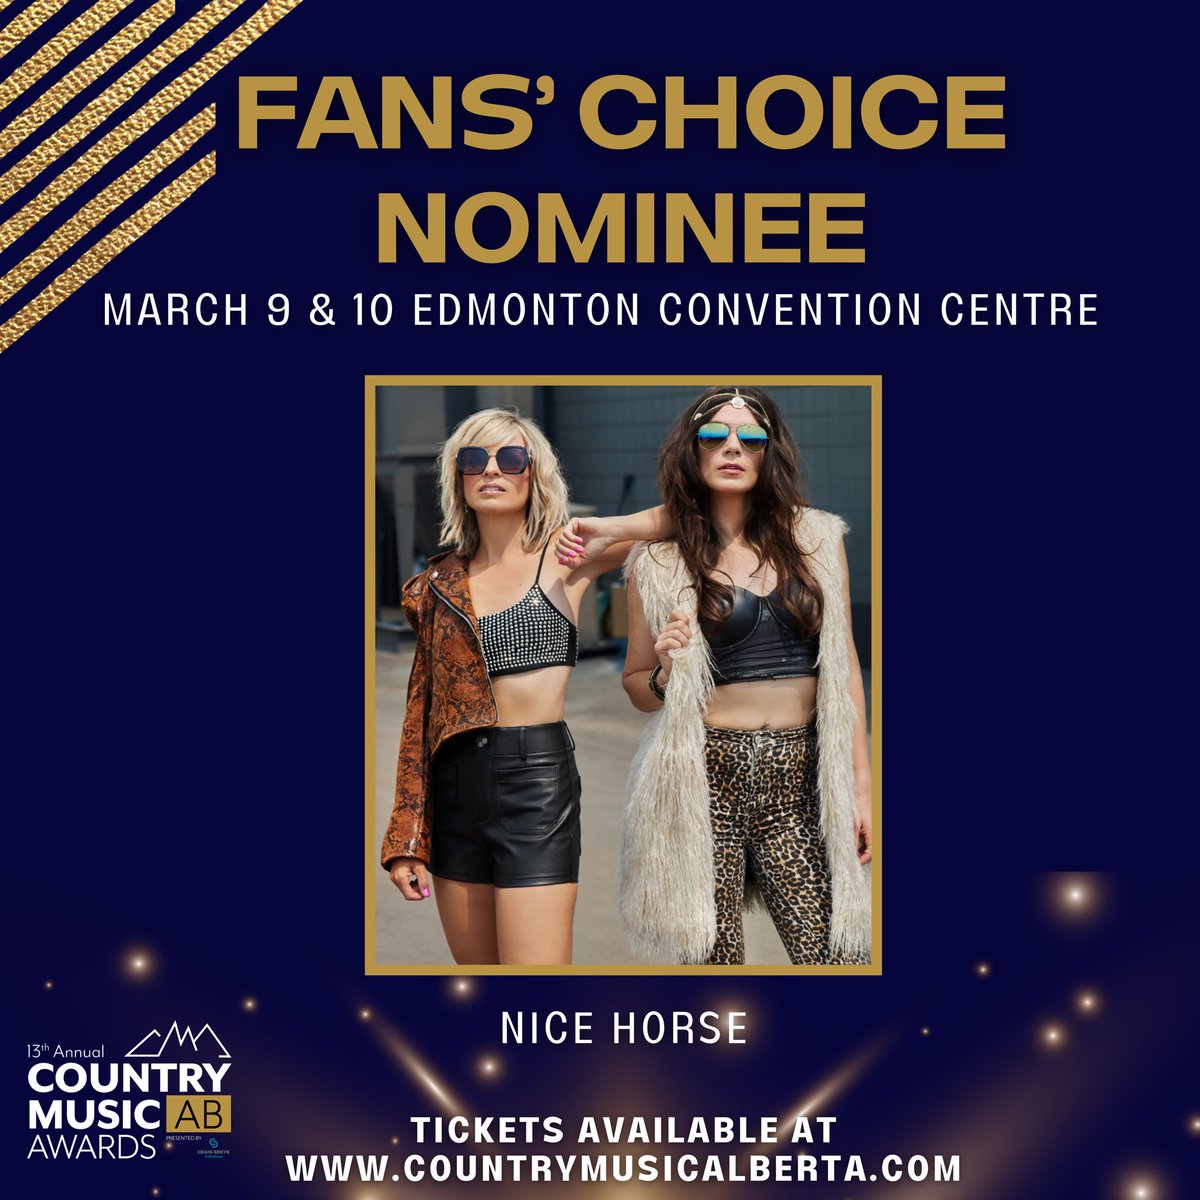 Voting is open NOW and you can vote for yer gals for this year’s FANS’ CHOICE for the @countrymusicalberta awards! Voting is open to anyone and everyone with an email address! Vote here —> surveymonkey.com/r/5MRK86W Spread the word and also…we love you!